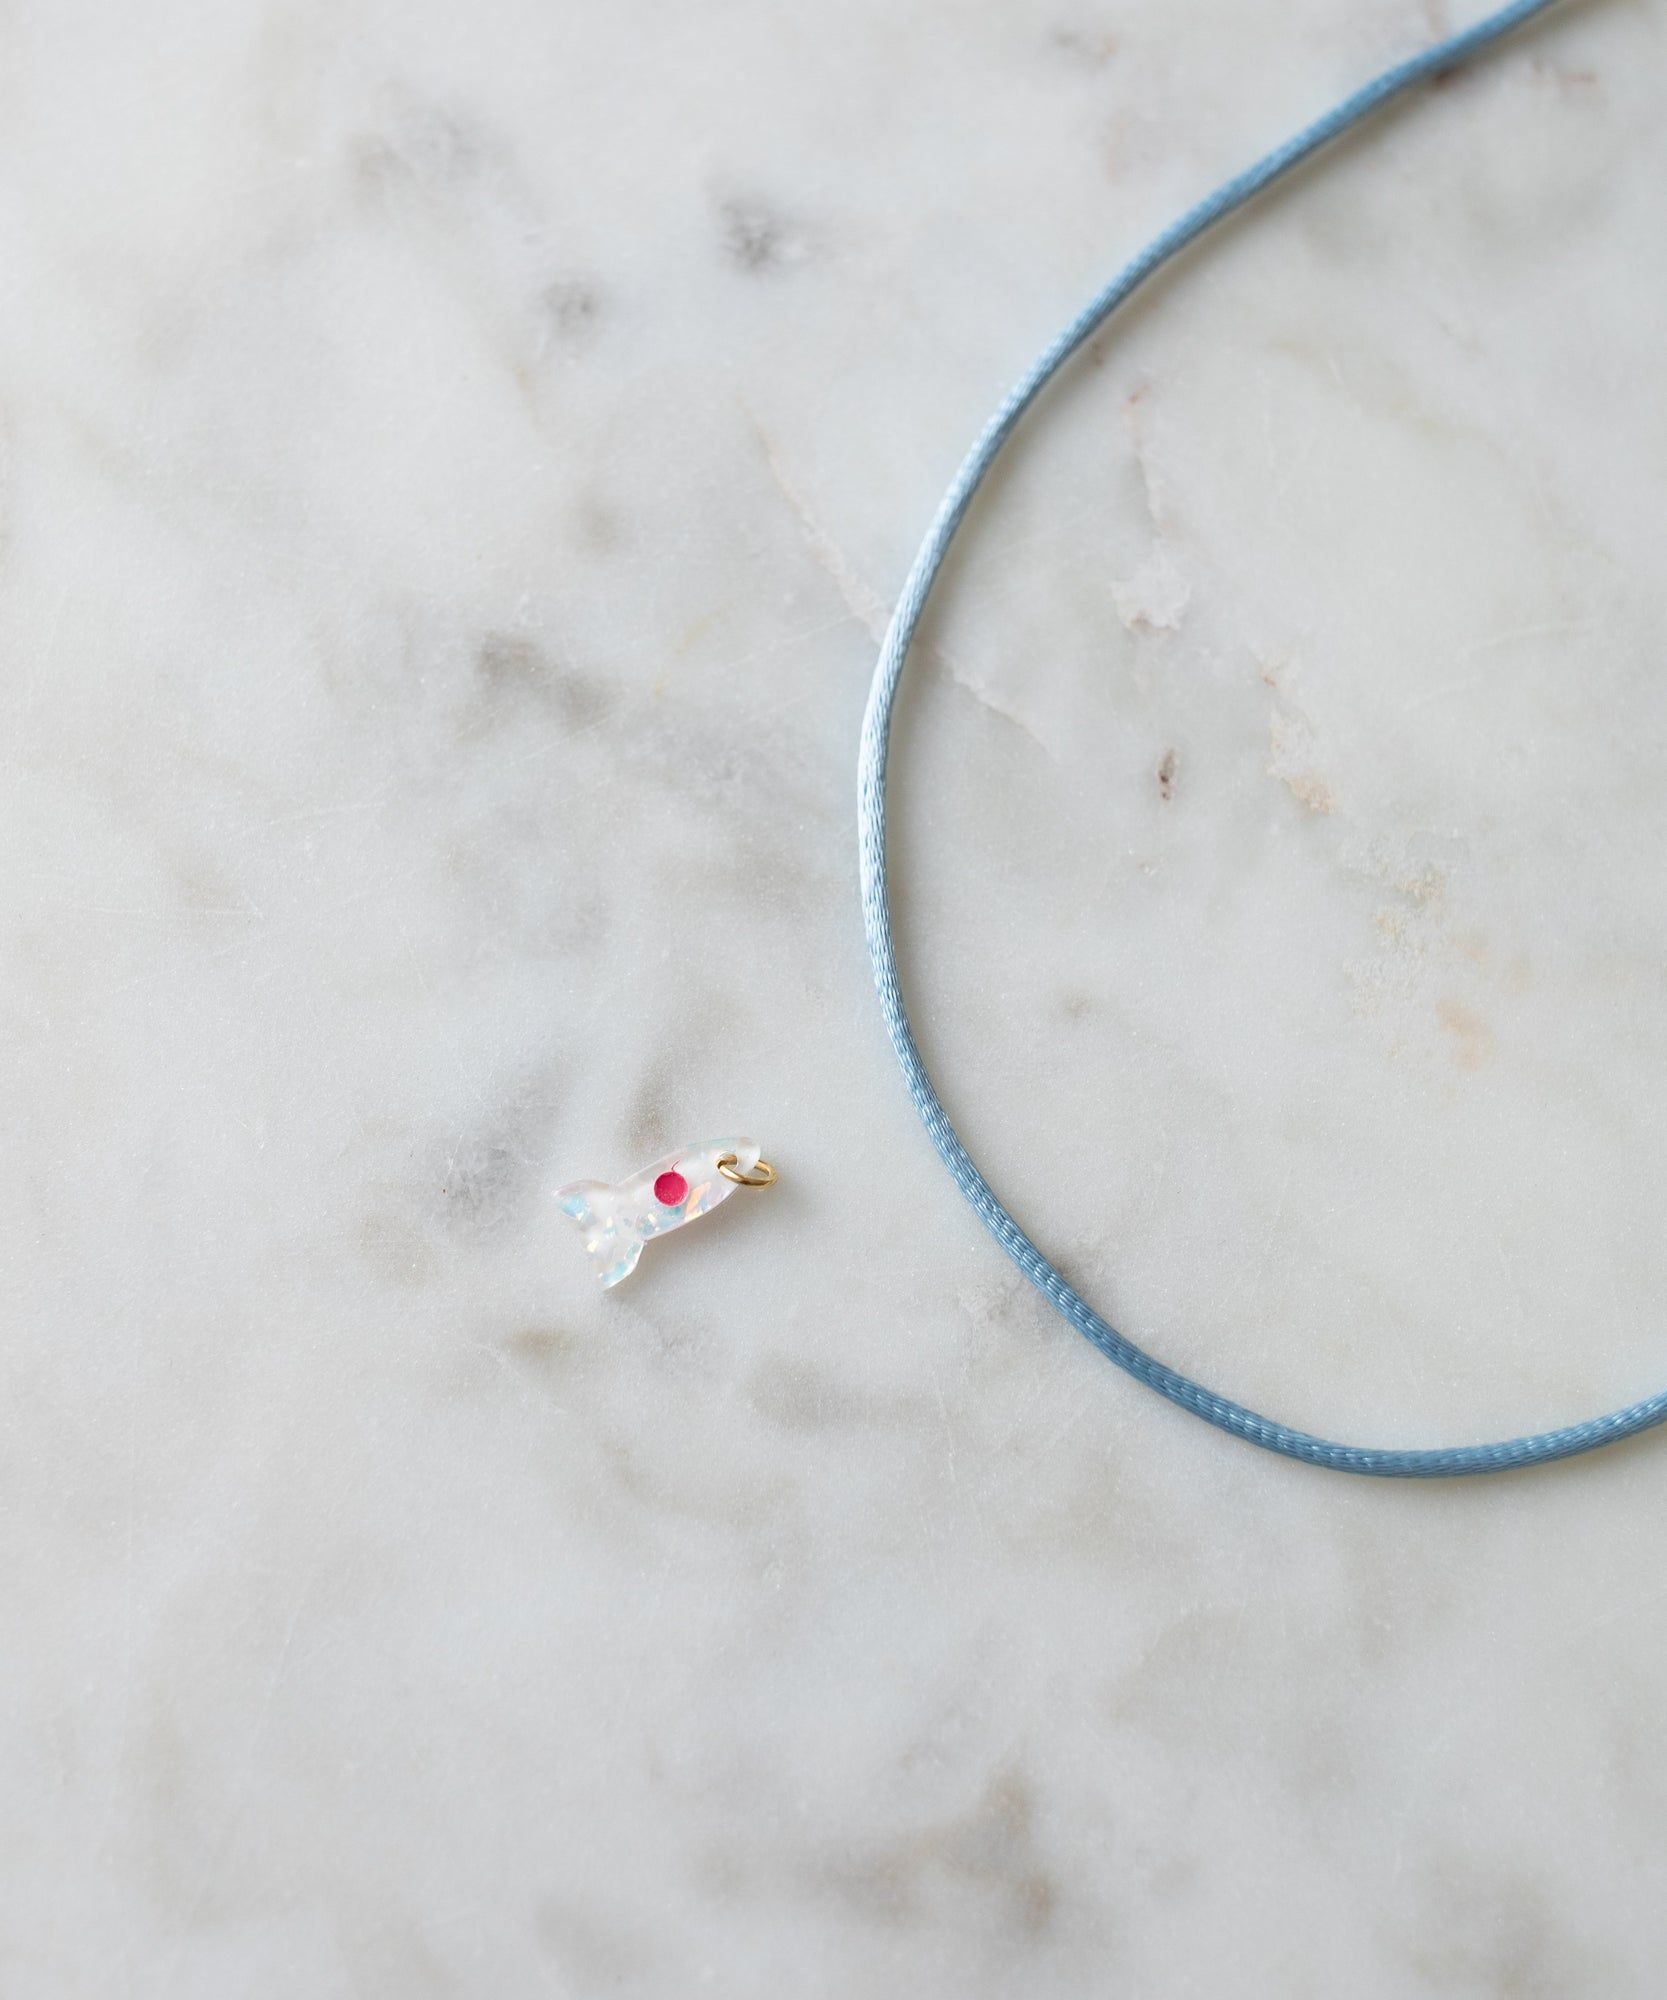 A delicate Rocket Charm pendant with a red gem, shaped like a bird, lies next to a light blue cord on a marbled surface, epitomizing the essence of DIY jewelry from WALD World.